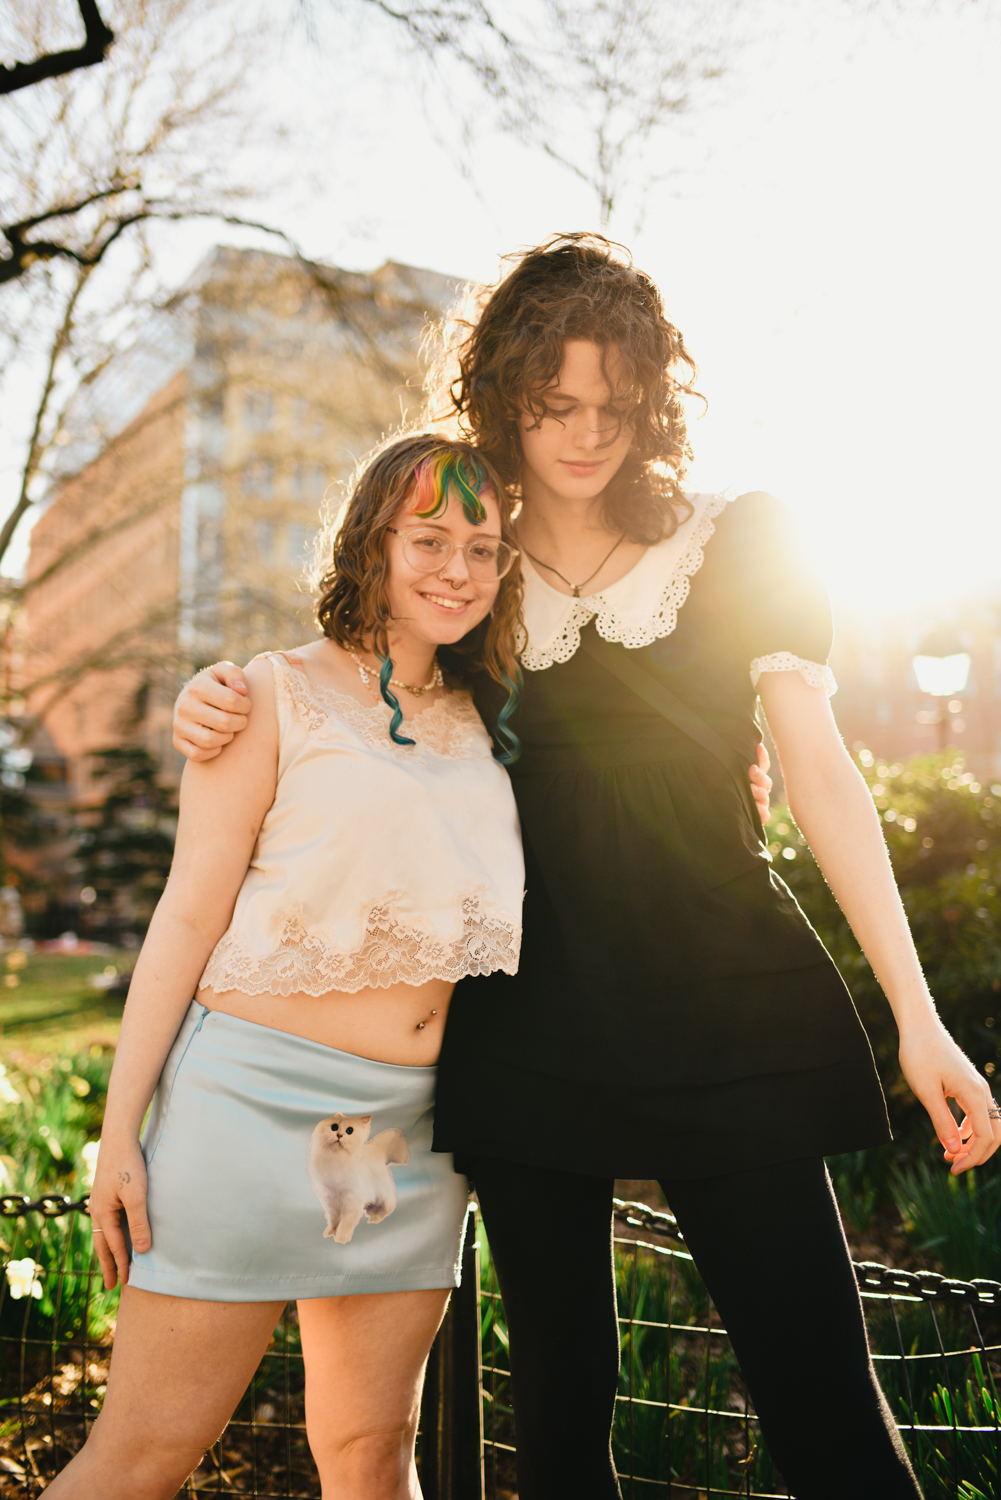 Ariel Rond and Saoirse Sowell stand together in a park with the sun shining on them. They have their arms around one another and smiling at the camera.